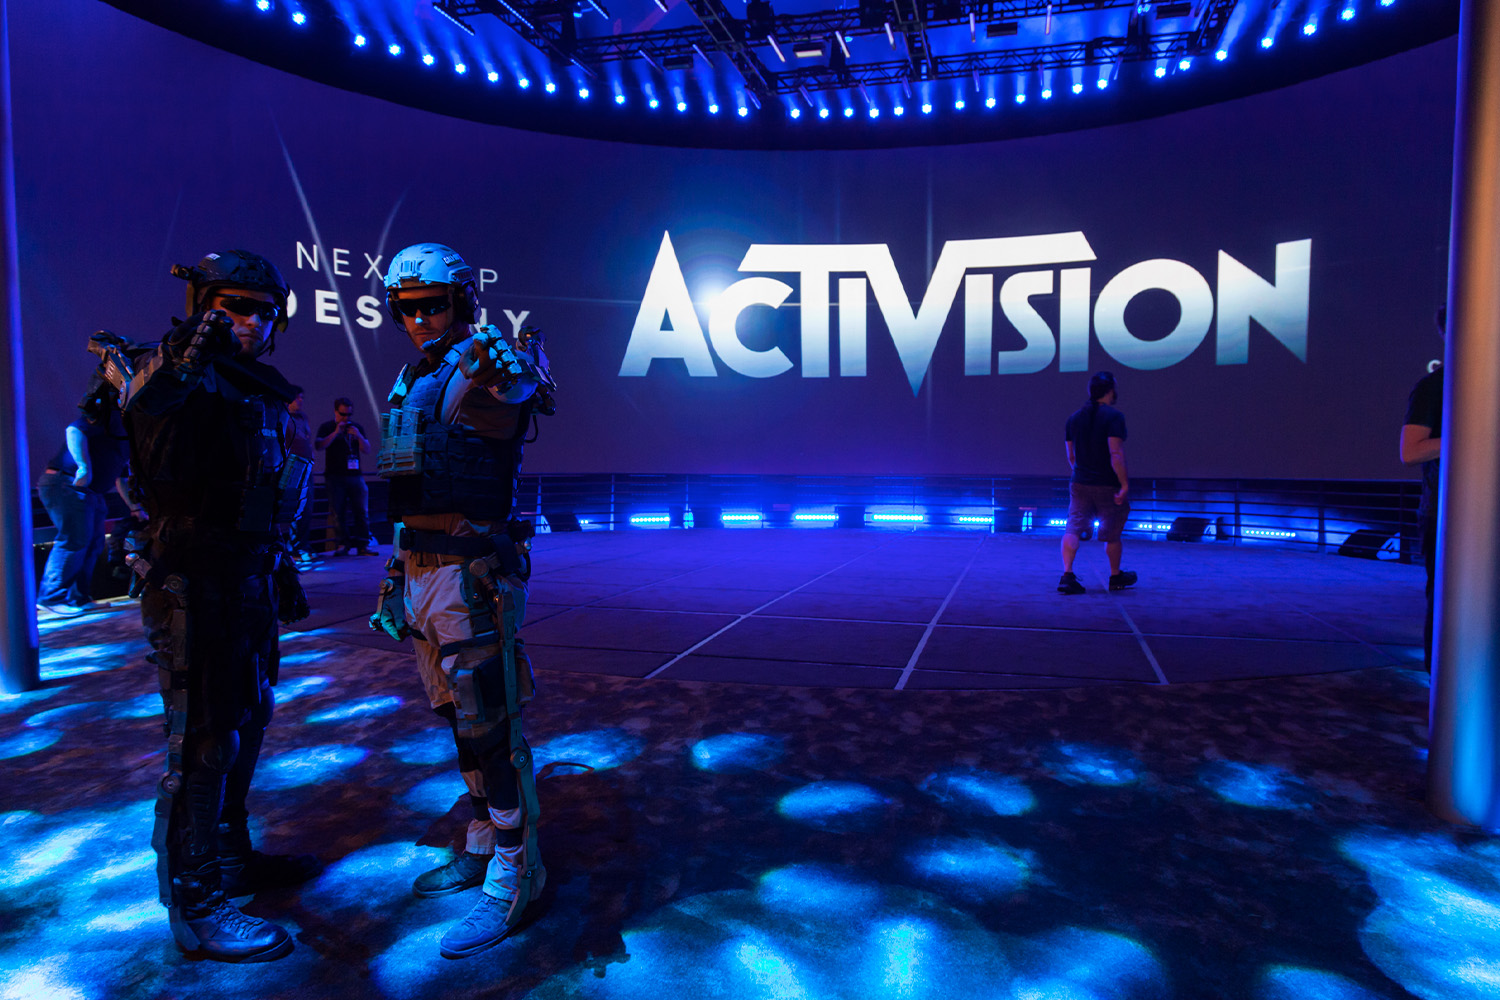 Activision Blizzard makes games like Call of Duty and was acquired by Microsoft.